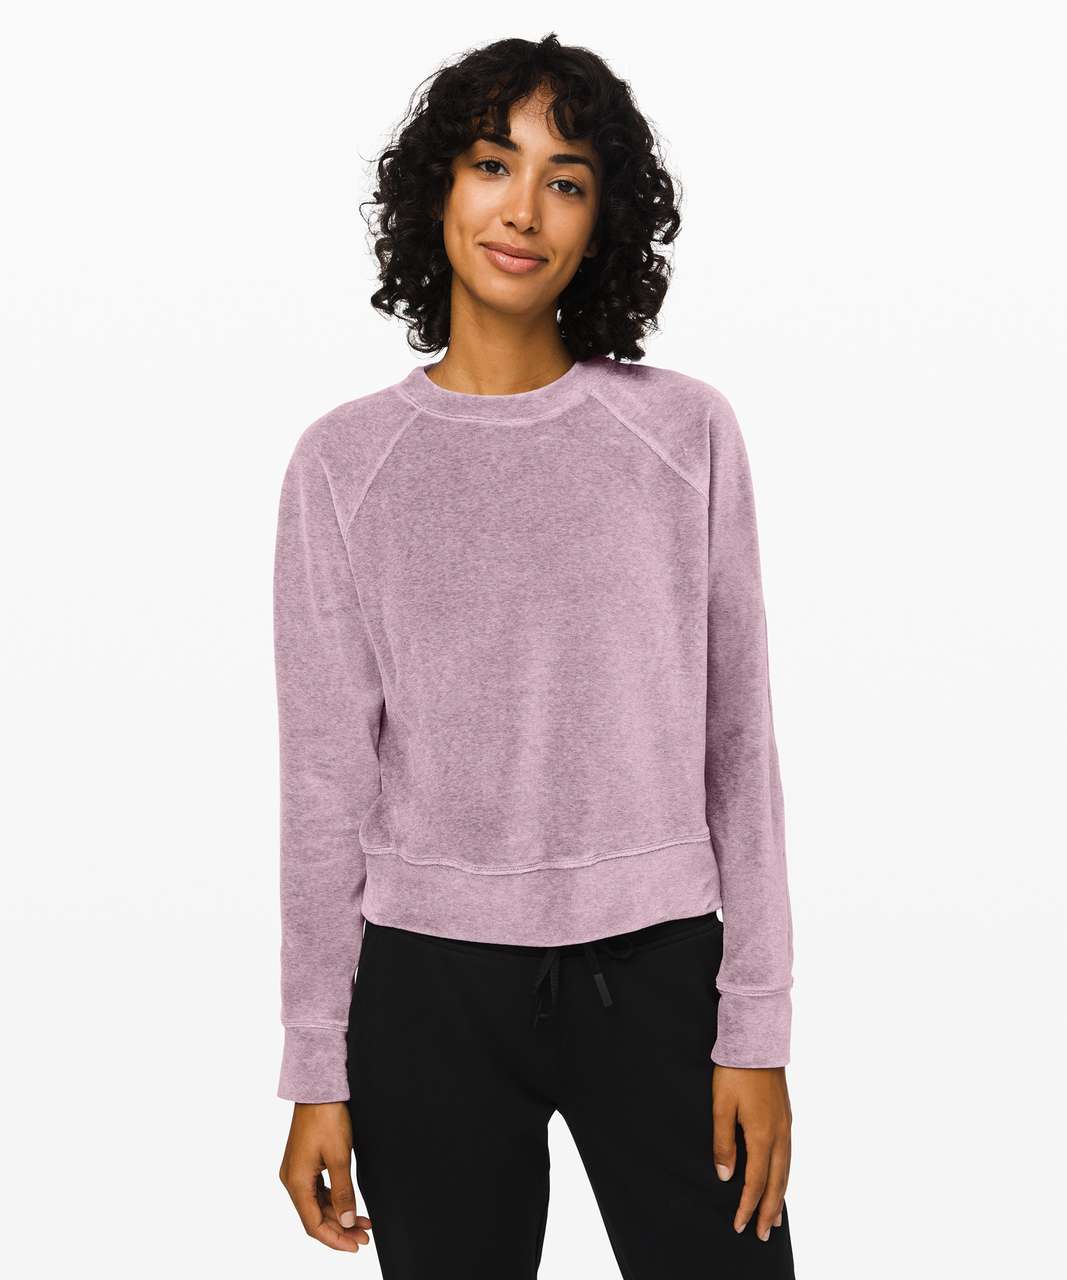 Lululemon Every Moment Crew - Heathered Frosted Mulberry